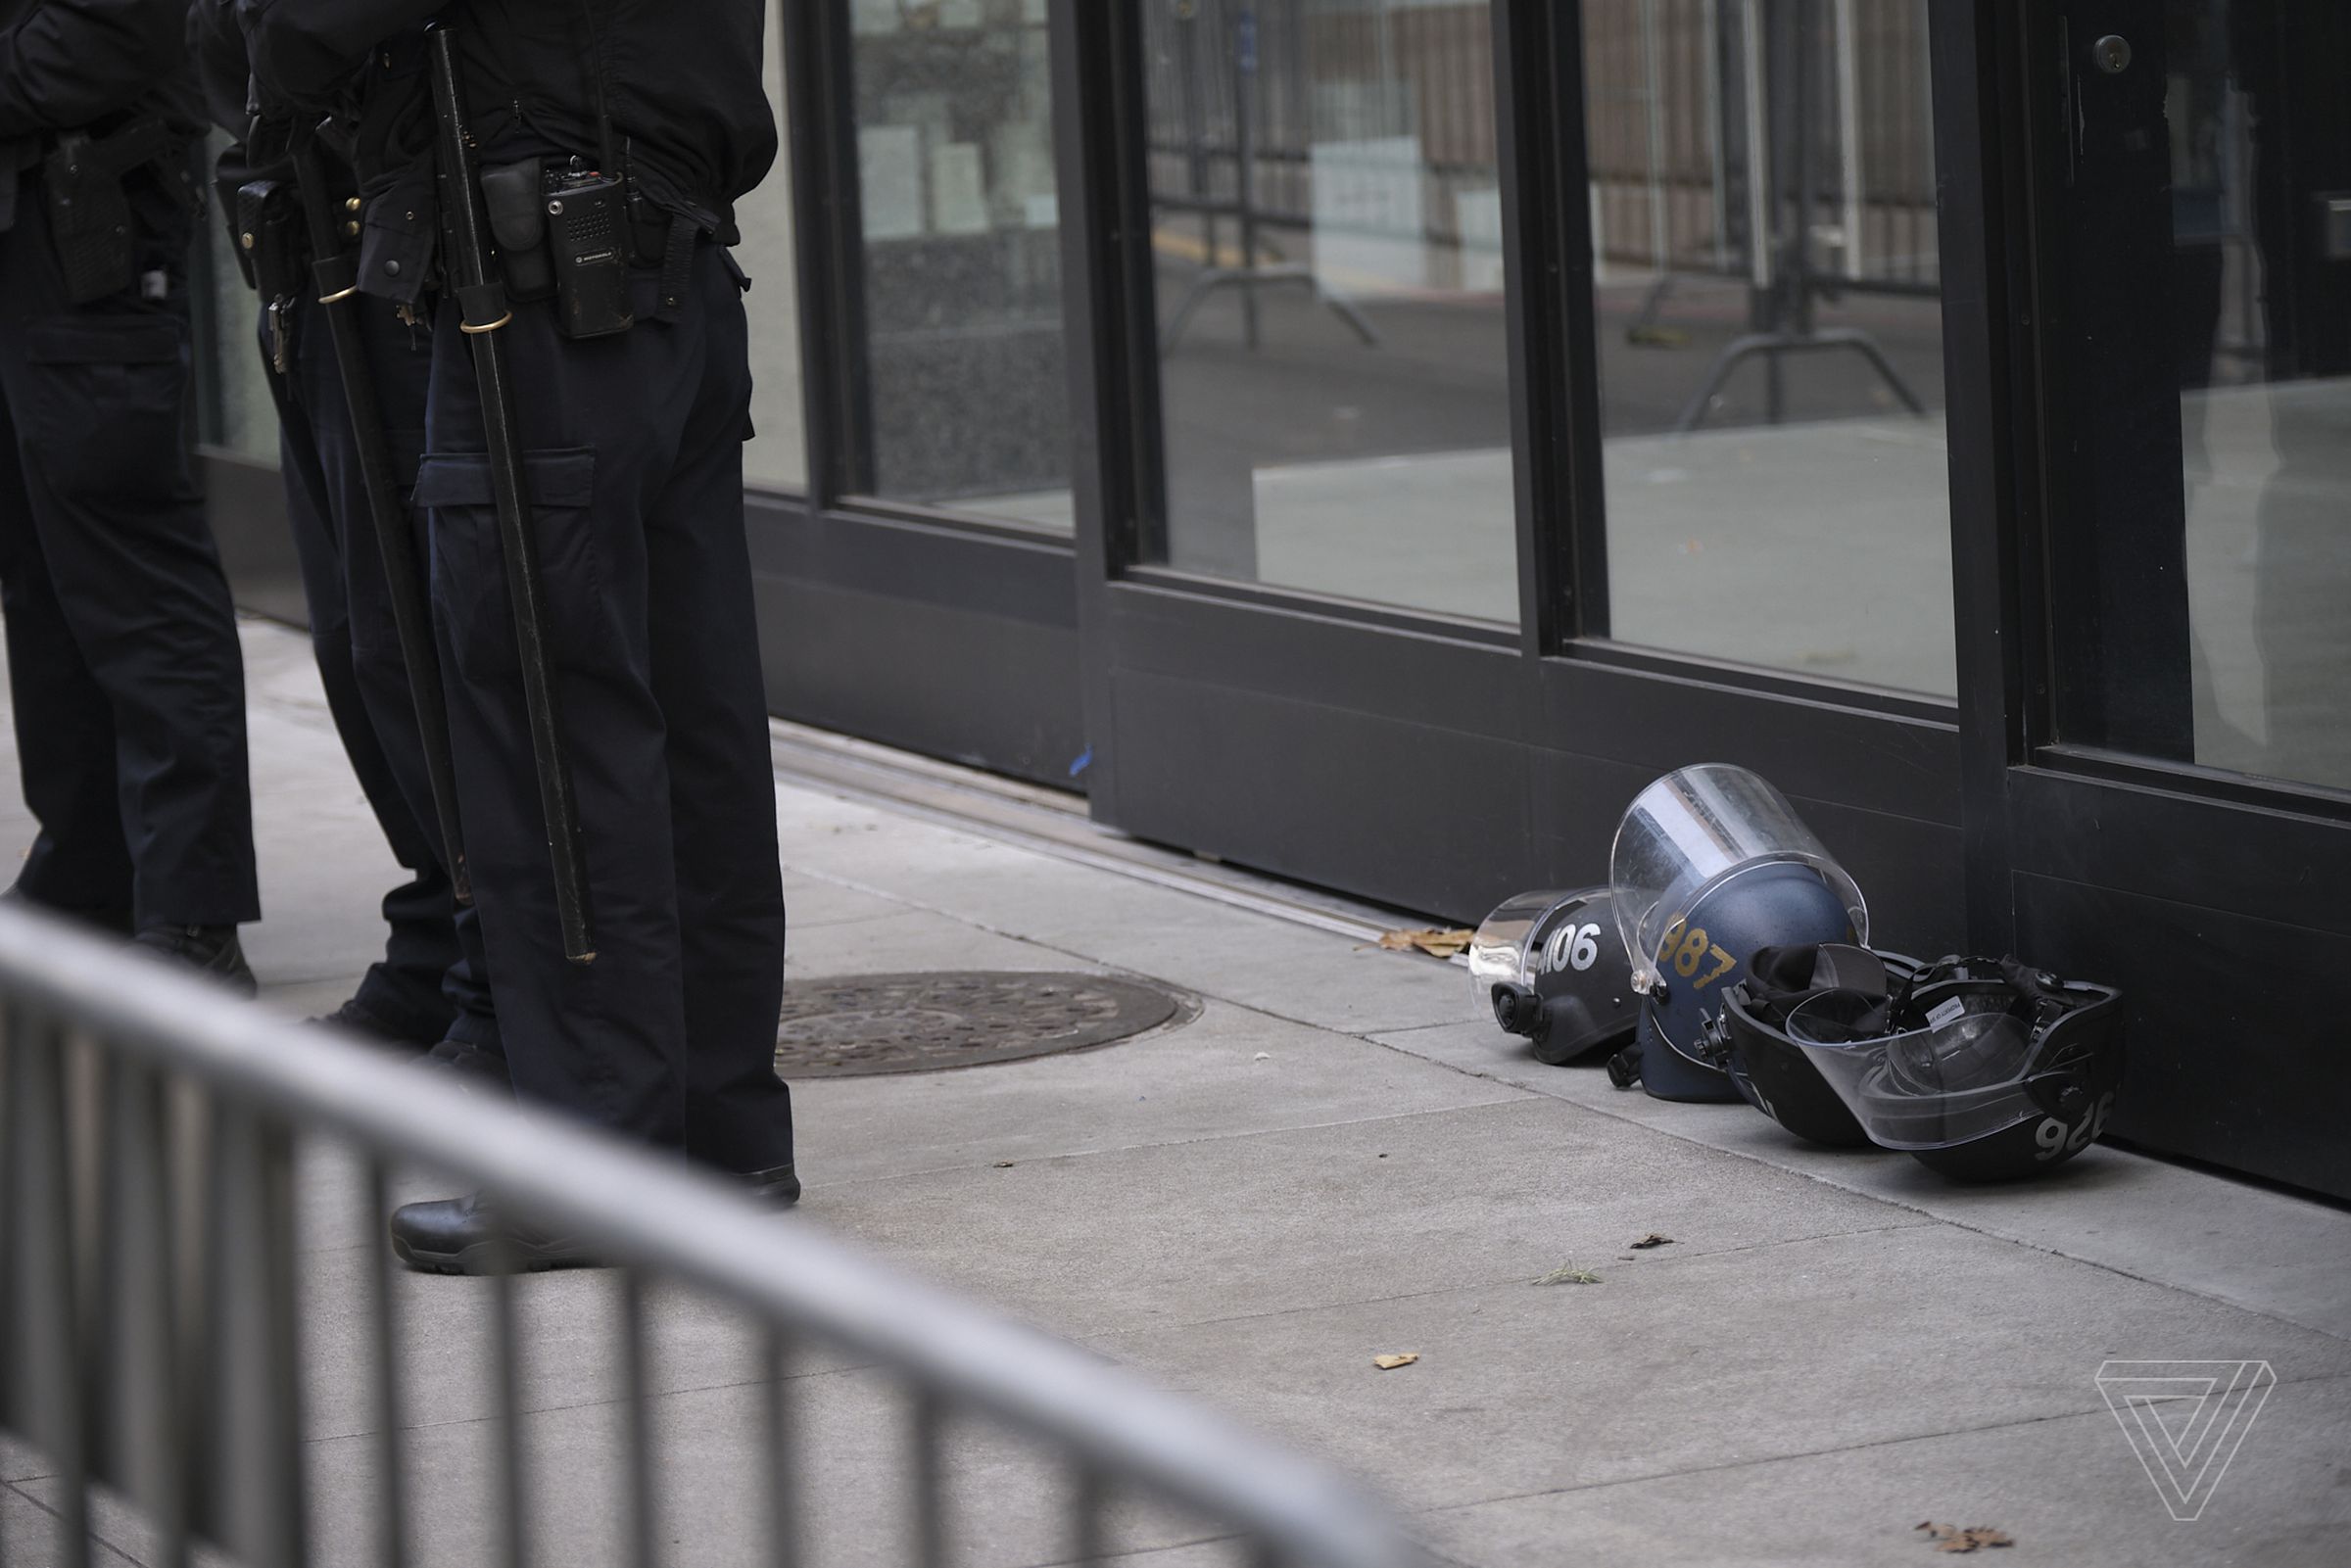 Riot gear was left unused during the pro-Trump protest near Twitter’s headquarters.